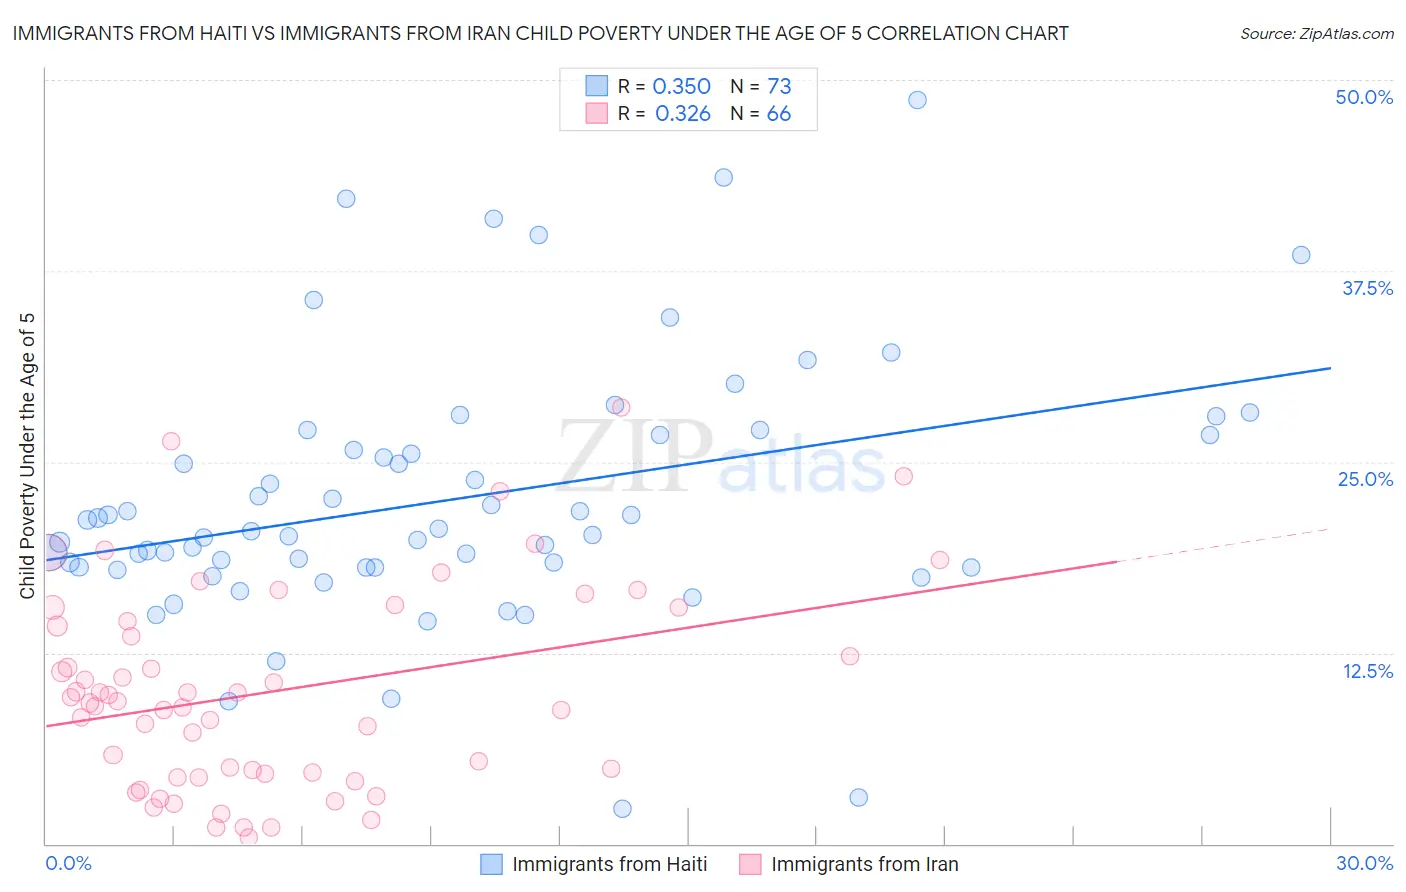 Immigrants from Haiti vs Immigrants from Iran Child Poverty Under the Age of 5